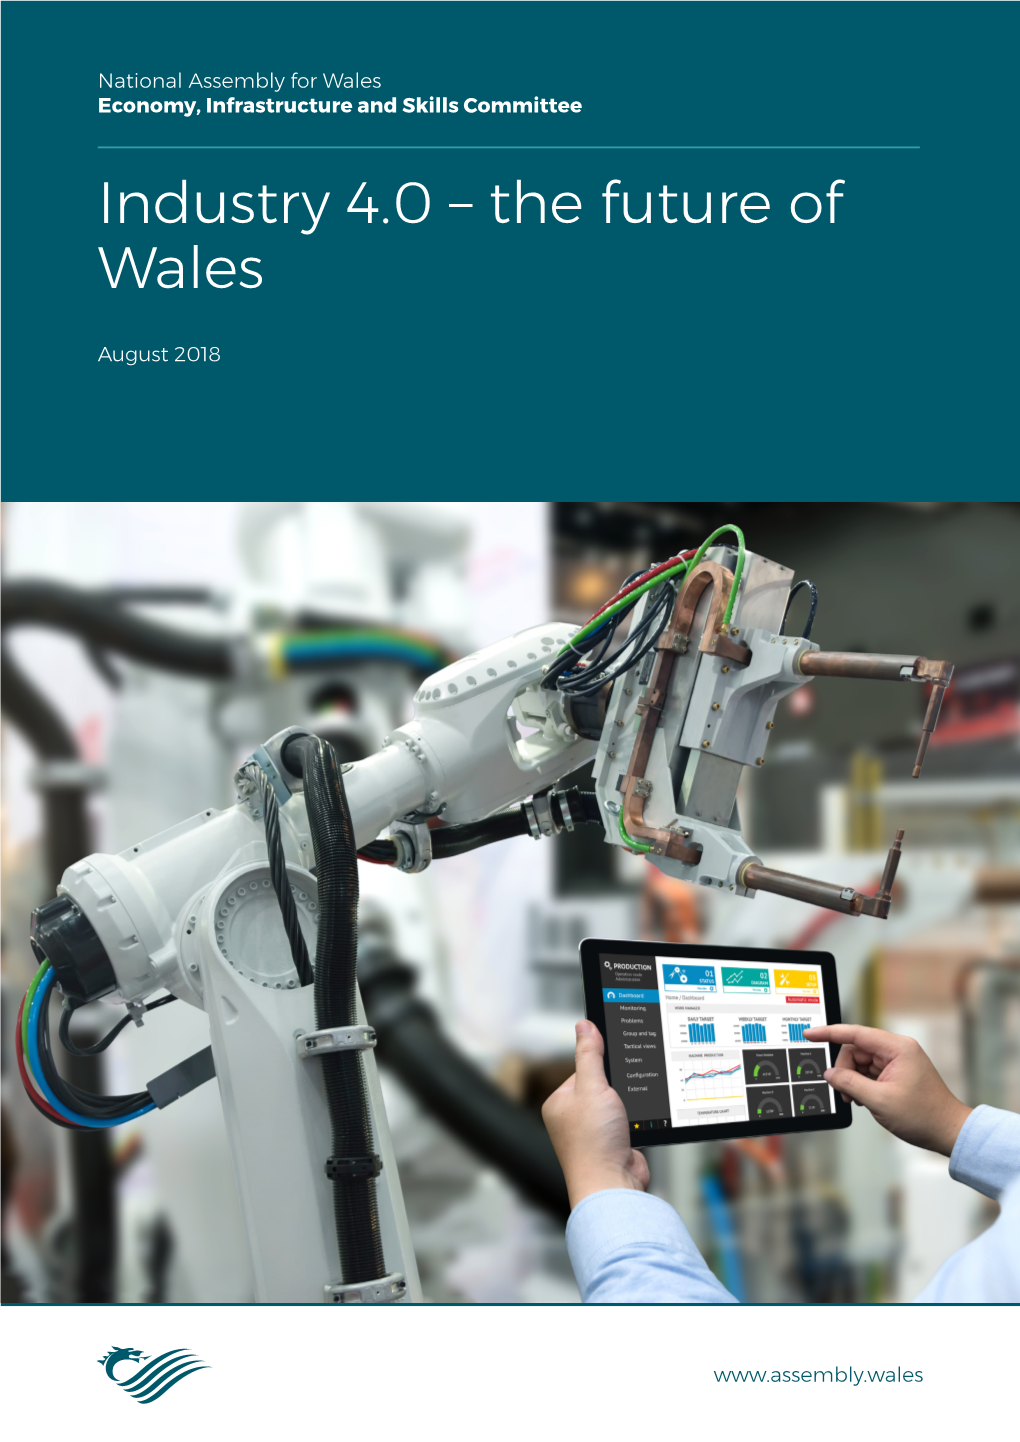 Industry 4.0 – the Future of Wales